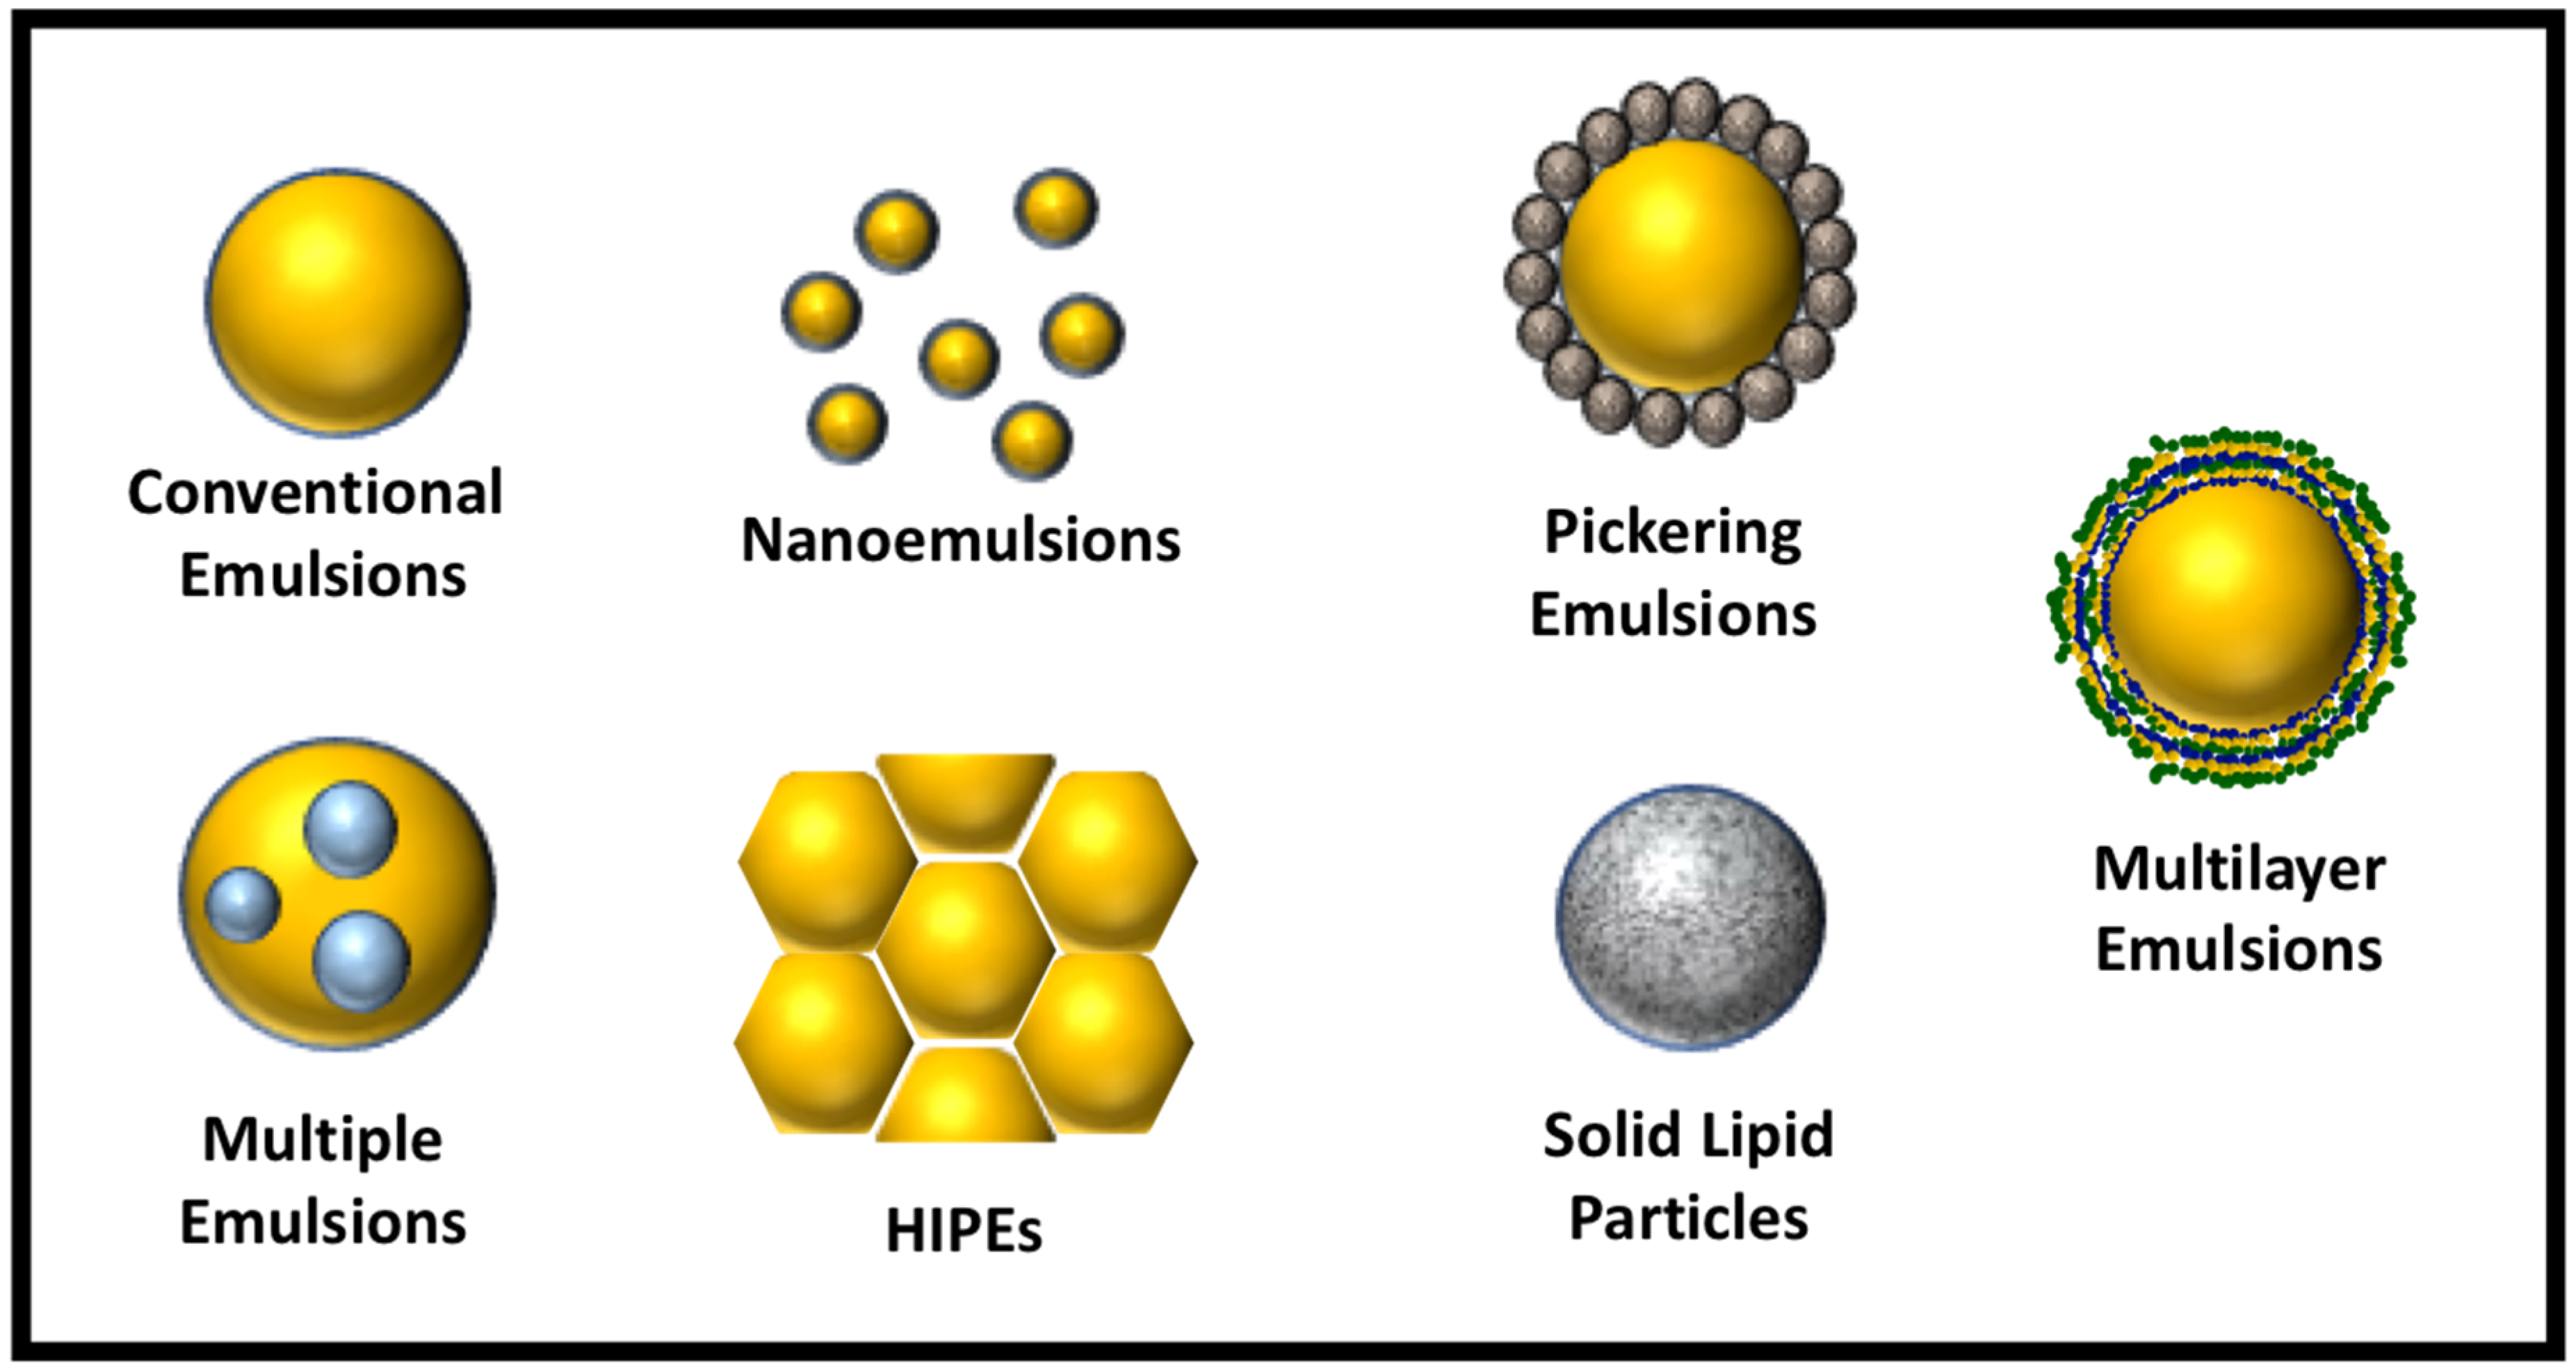 Food Science Corner: What are emulsions? - An exclusive community